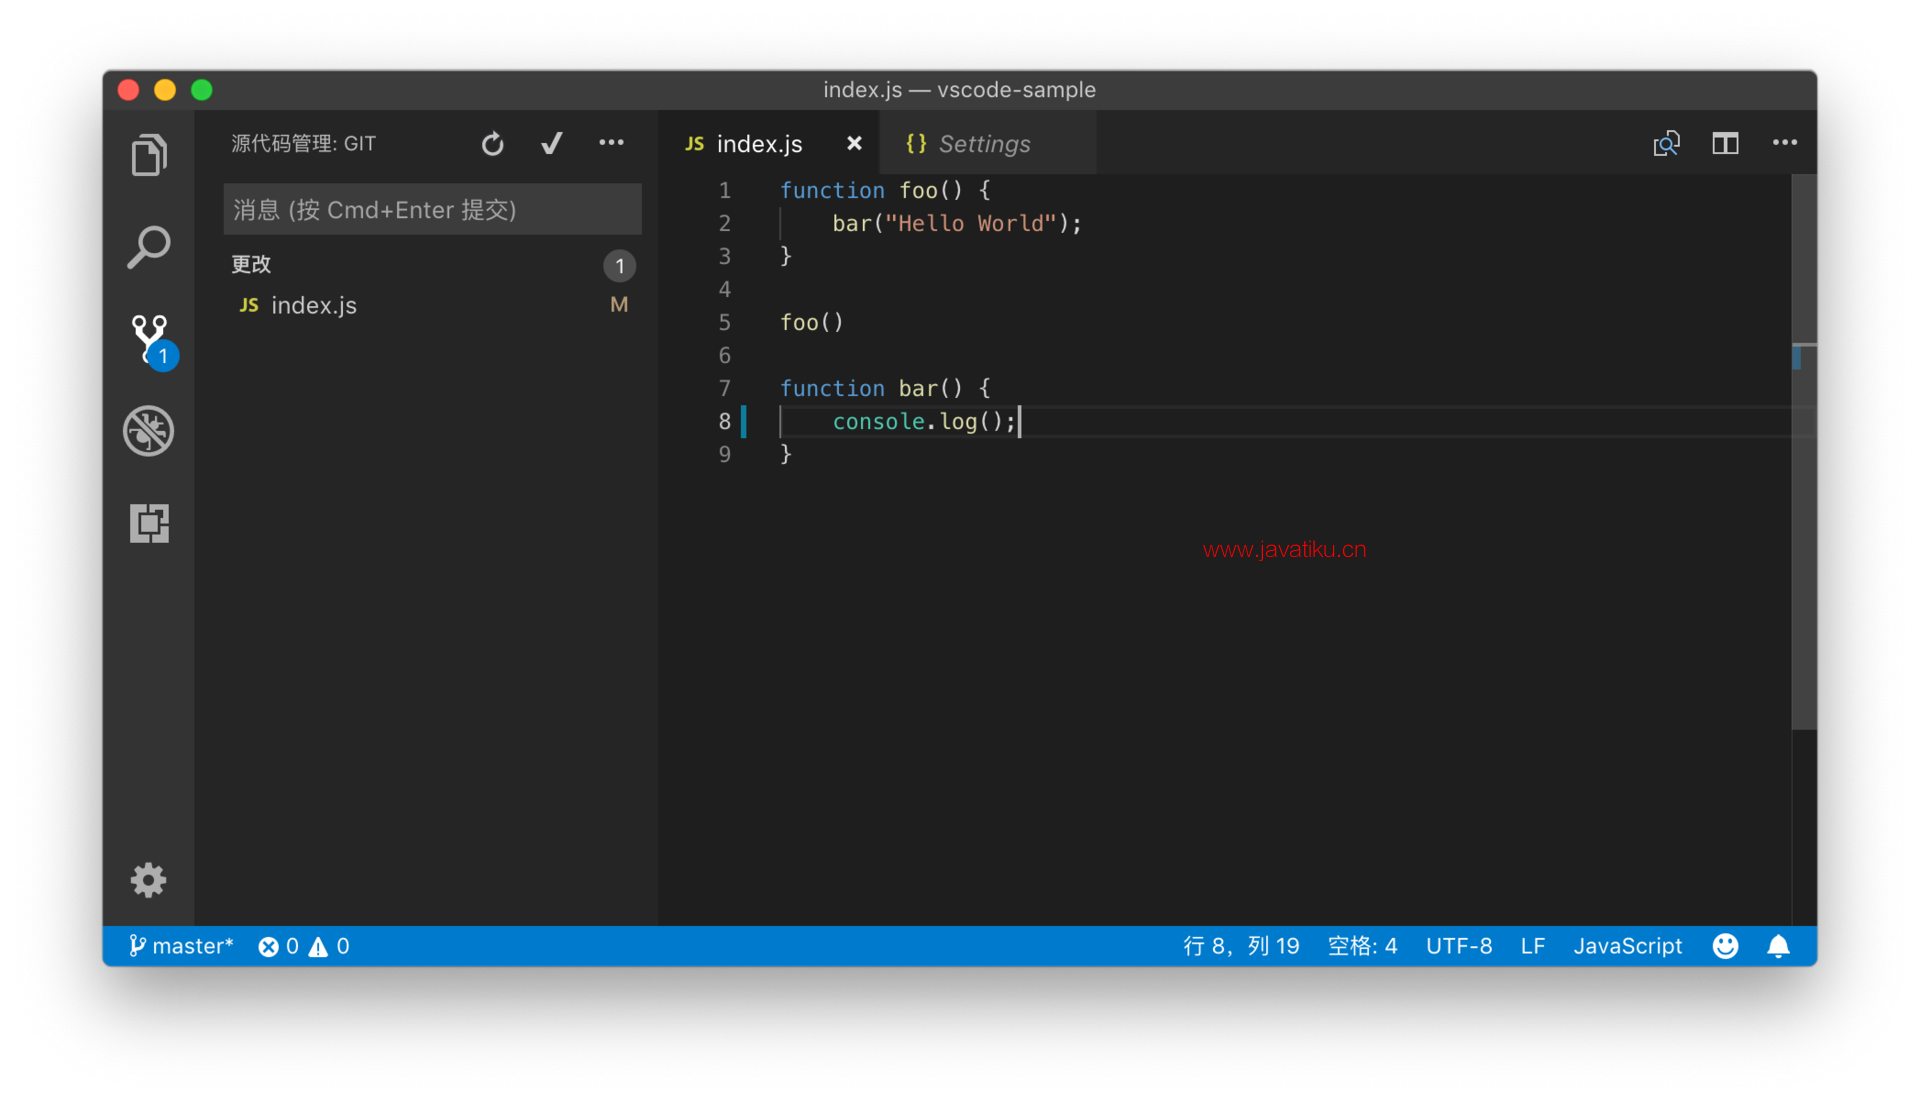 vscode-versioning-view-03.png